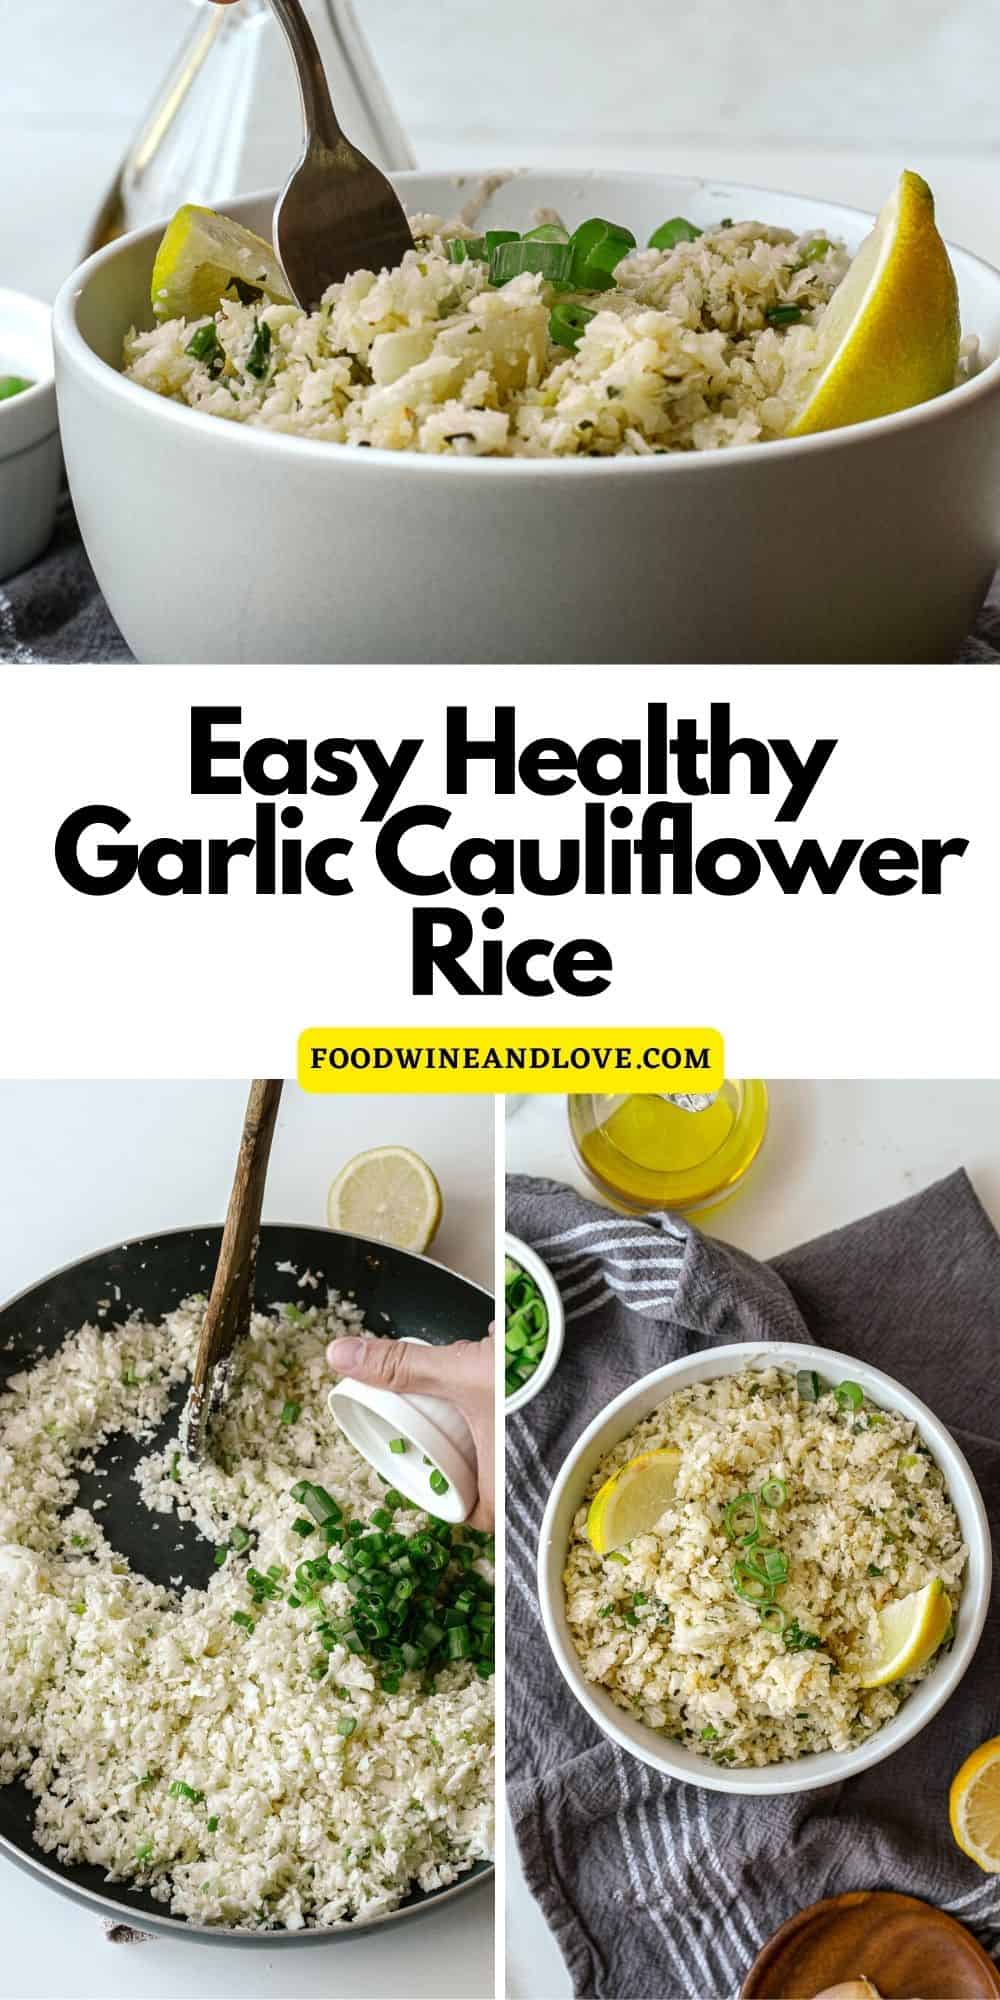 Easy Healthy Garlic Cauliflower Rice, a delicious quick and simple vegan recipe that is perfect as a side or as a meal in itself.